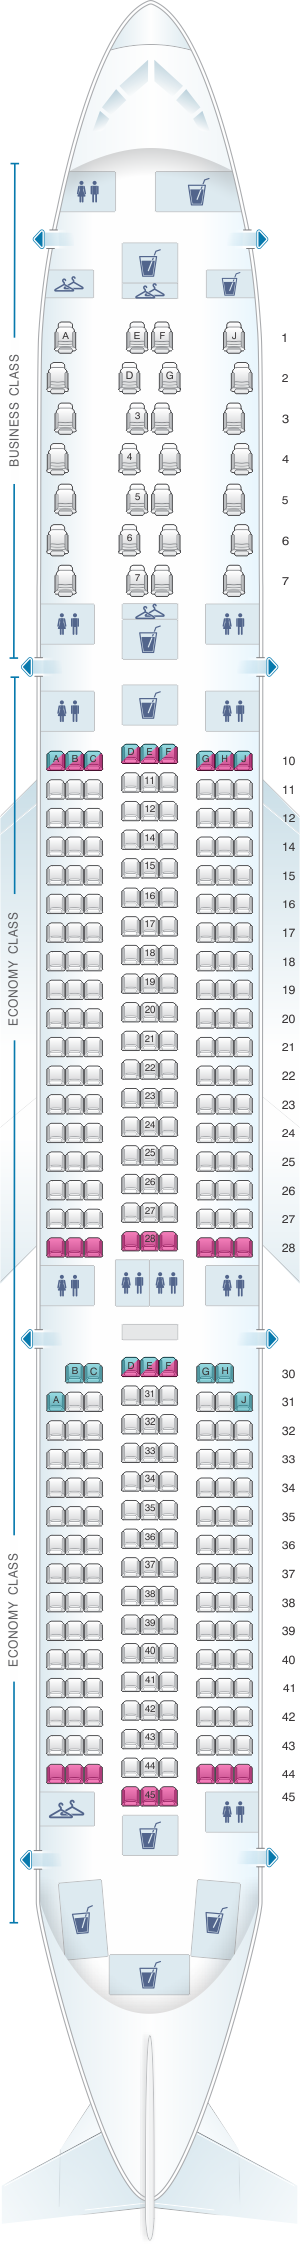 Seat map for Air Mauritius Airbus A350 900